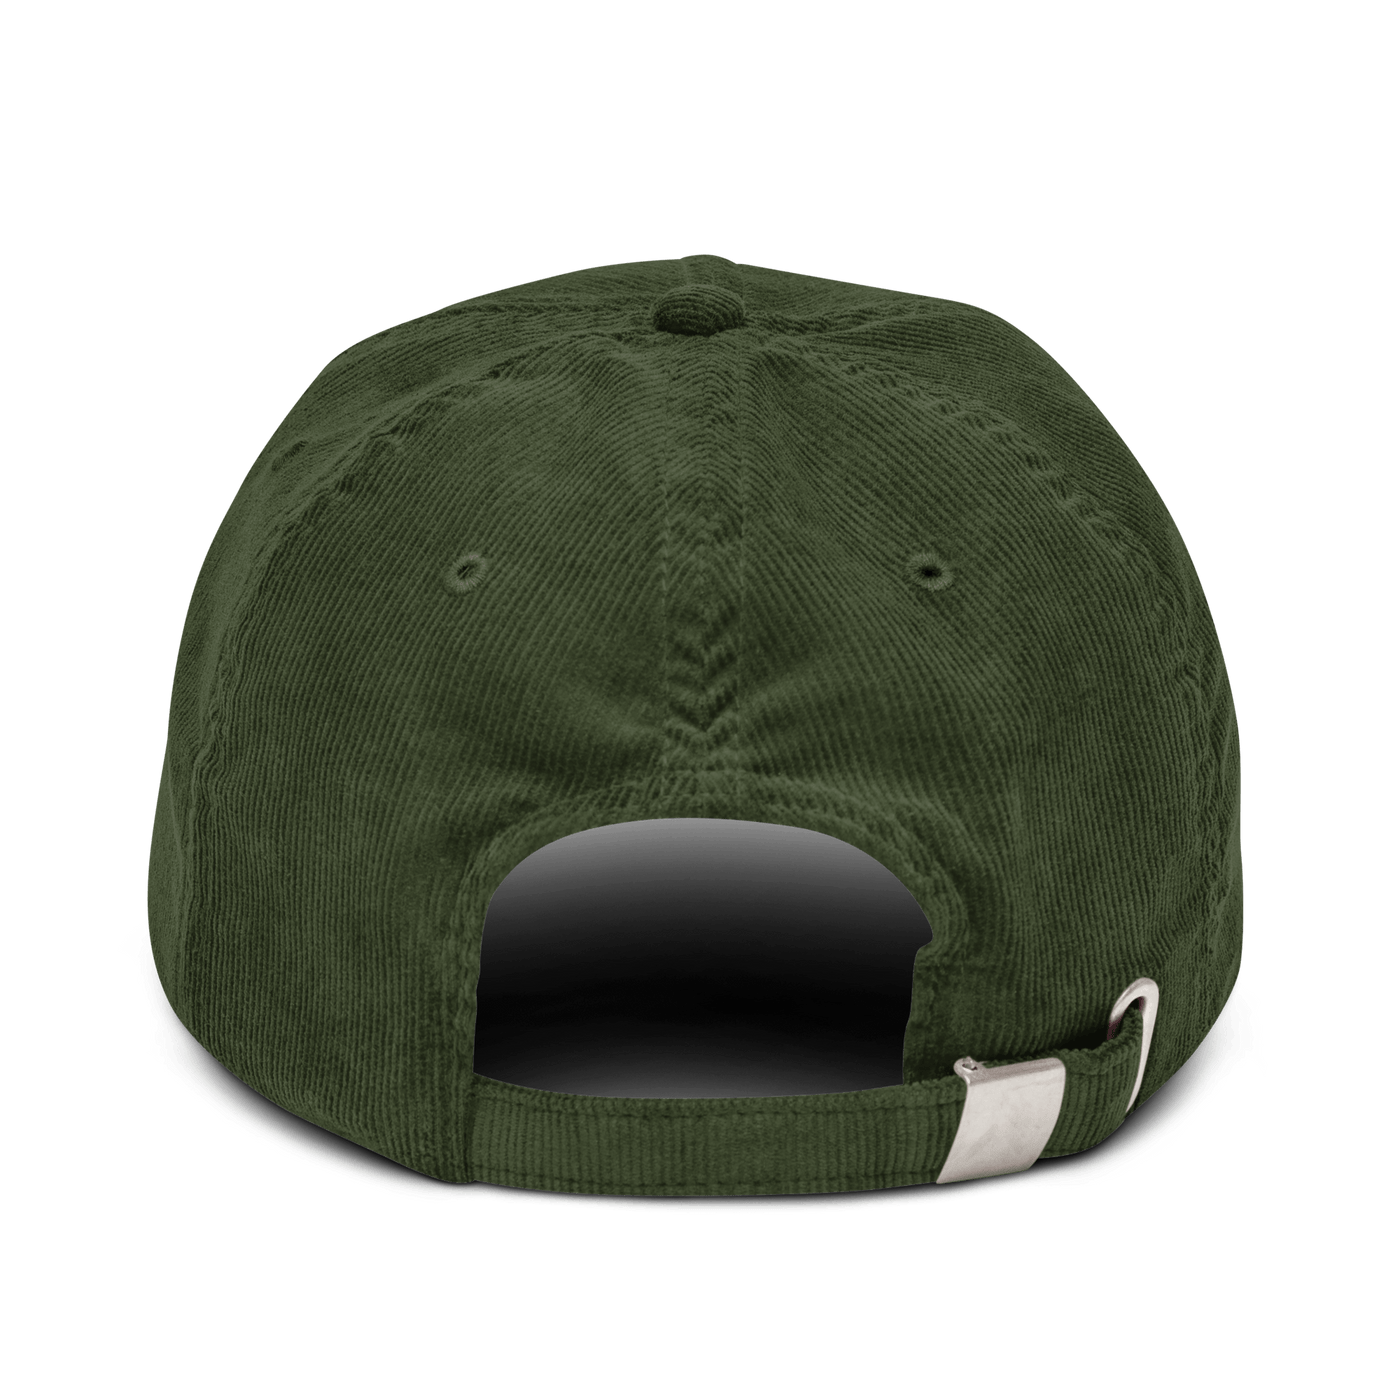 Cold Brew Corduroy hat - Dark Olive - - Just Another Cap Store